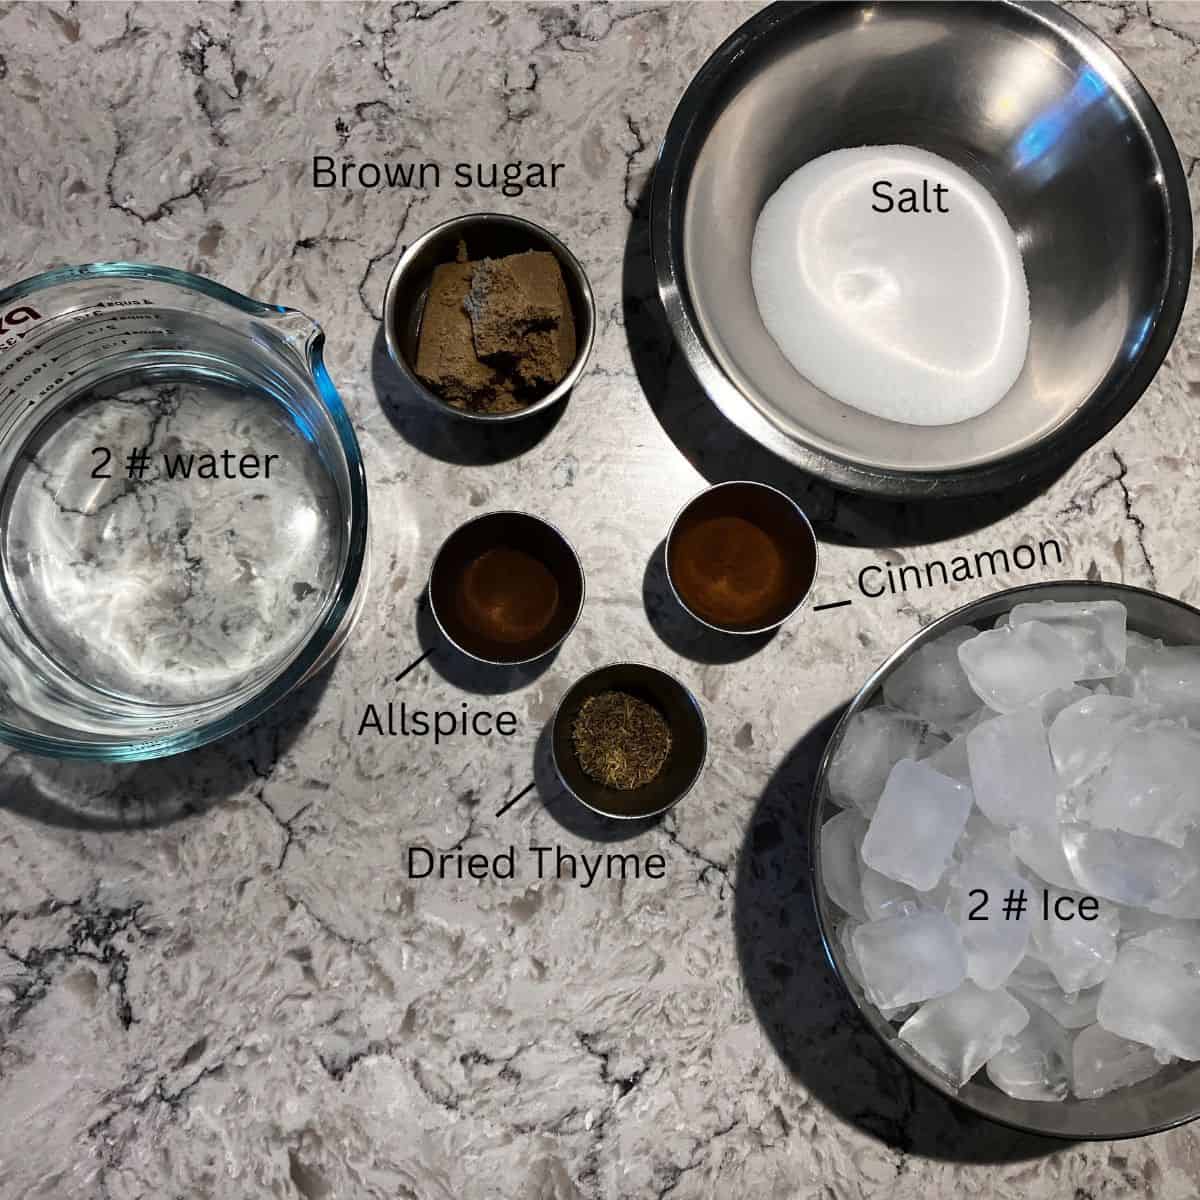 Brine ingredients for smoked ribs, including ice, water, salt, brown sugar, allspice, cinnamon, and dried thyme in separate dishes. 